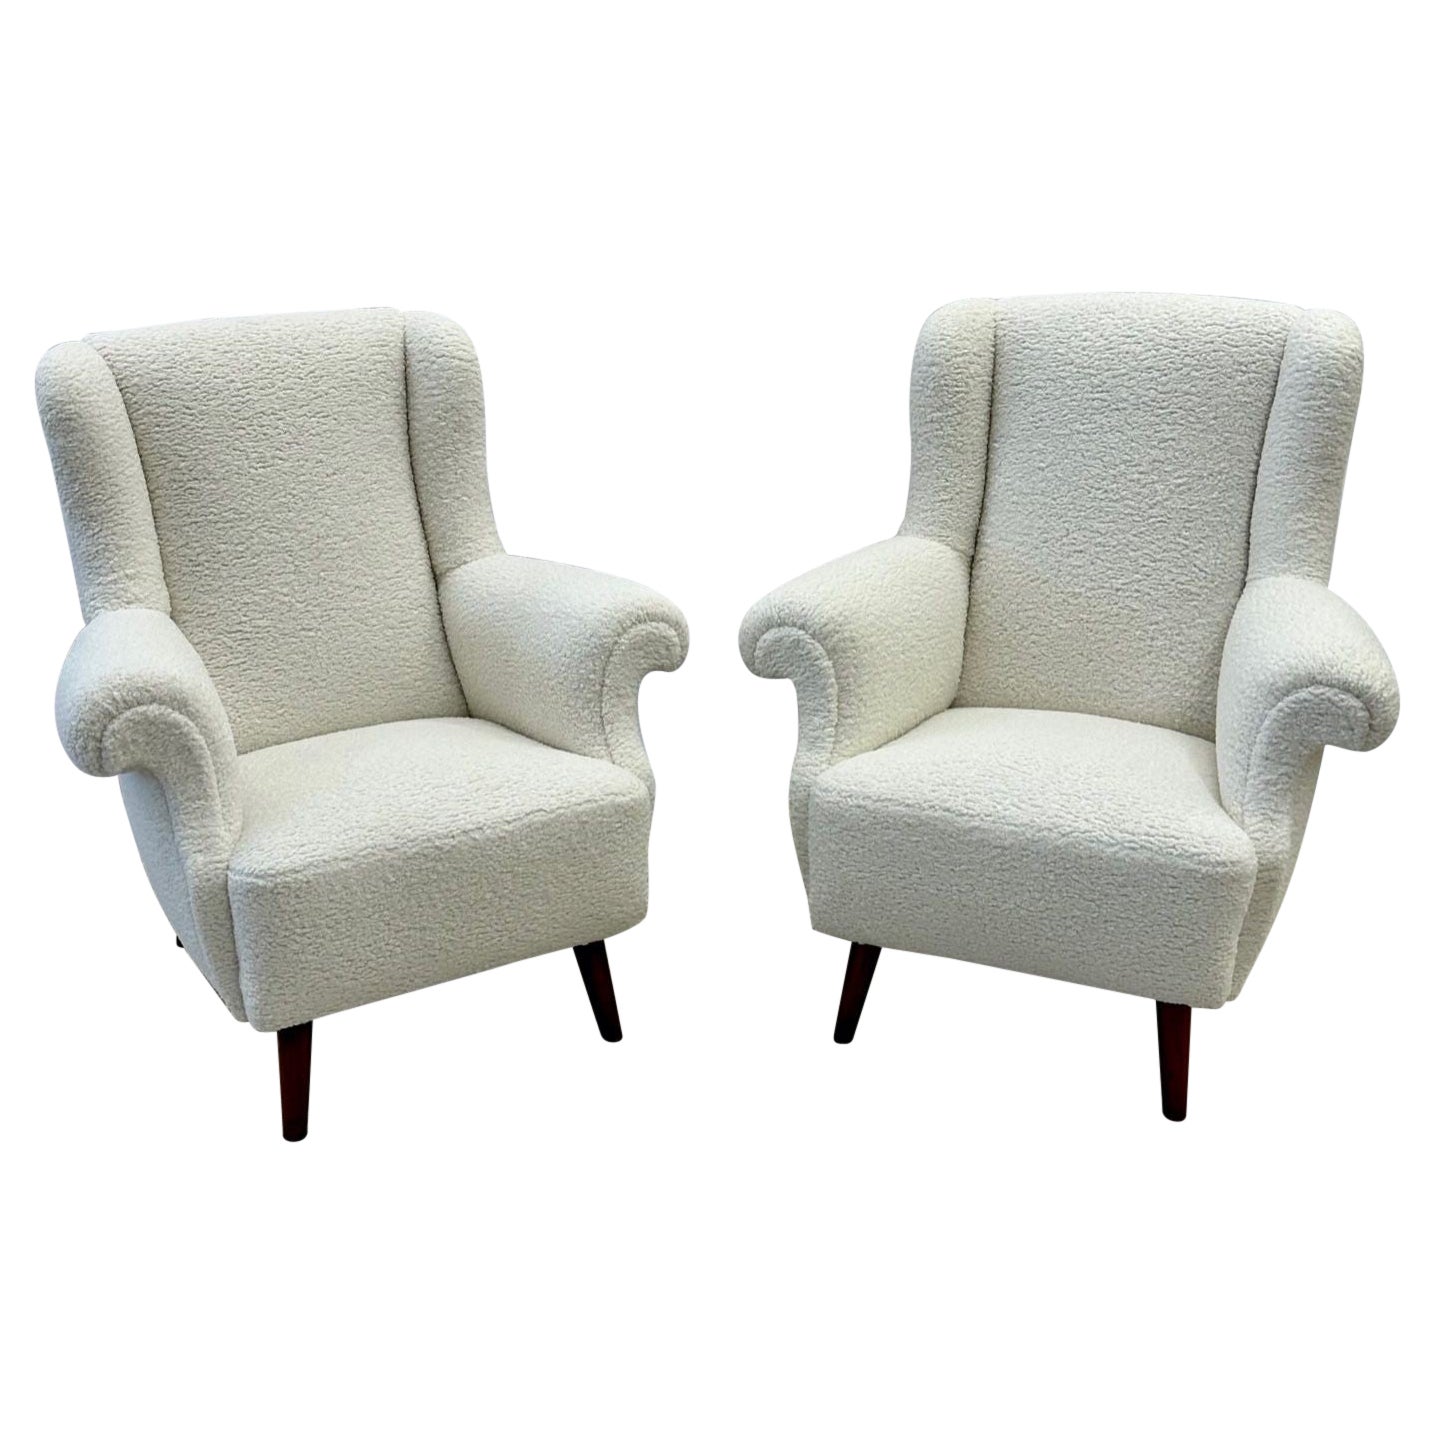 Pair American Mid-Century Scroll Lounge / Wingback Chairs, Boucle, Draper Style